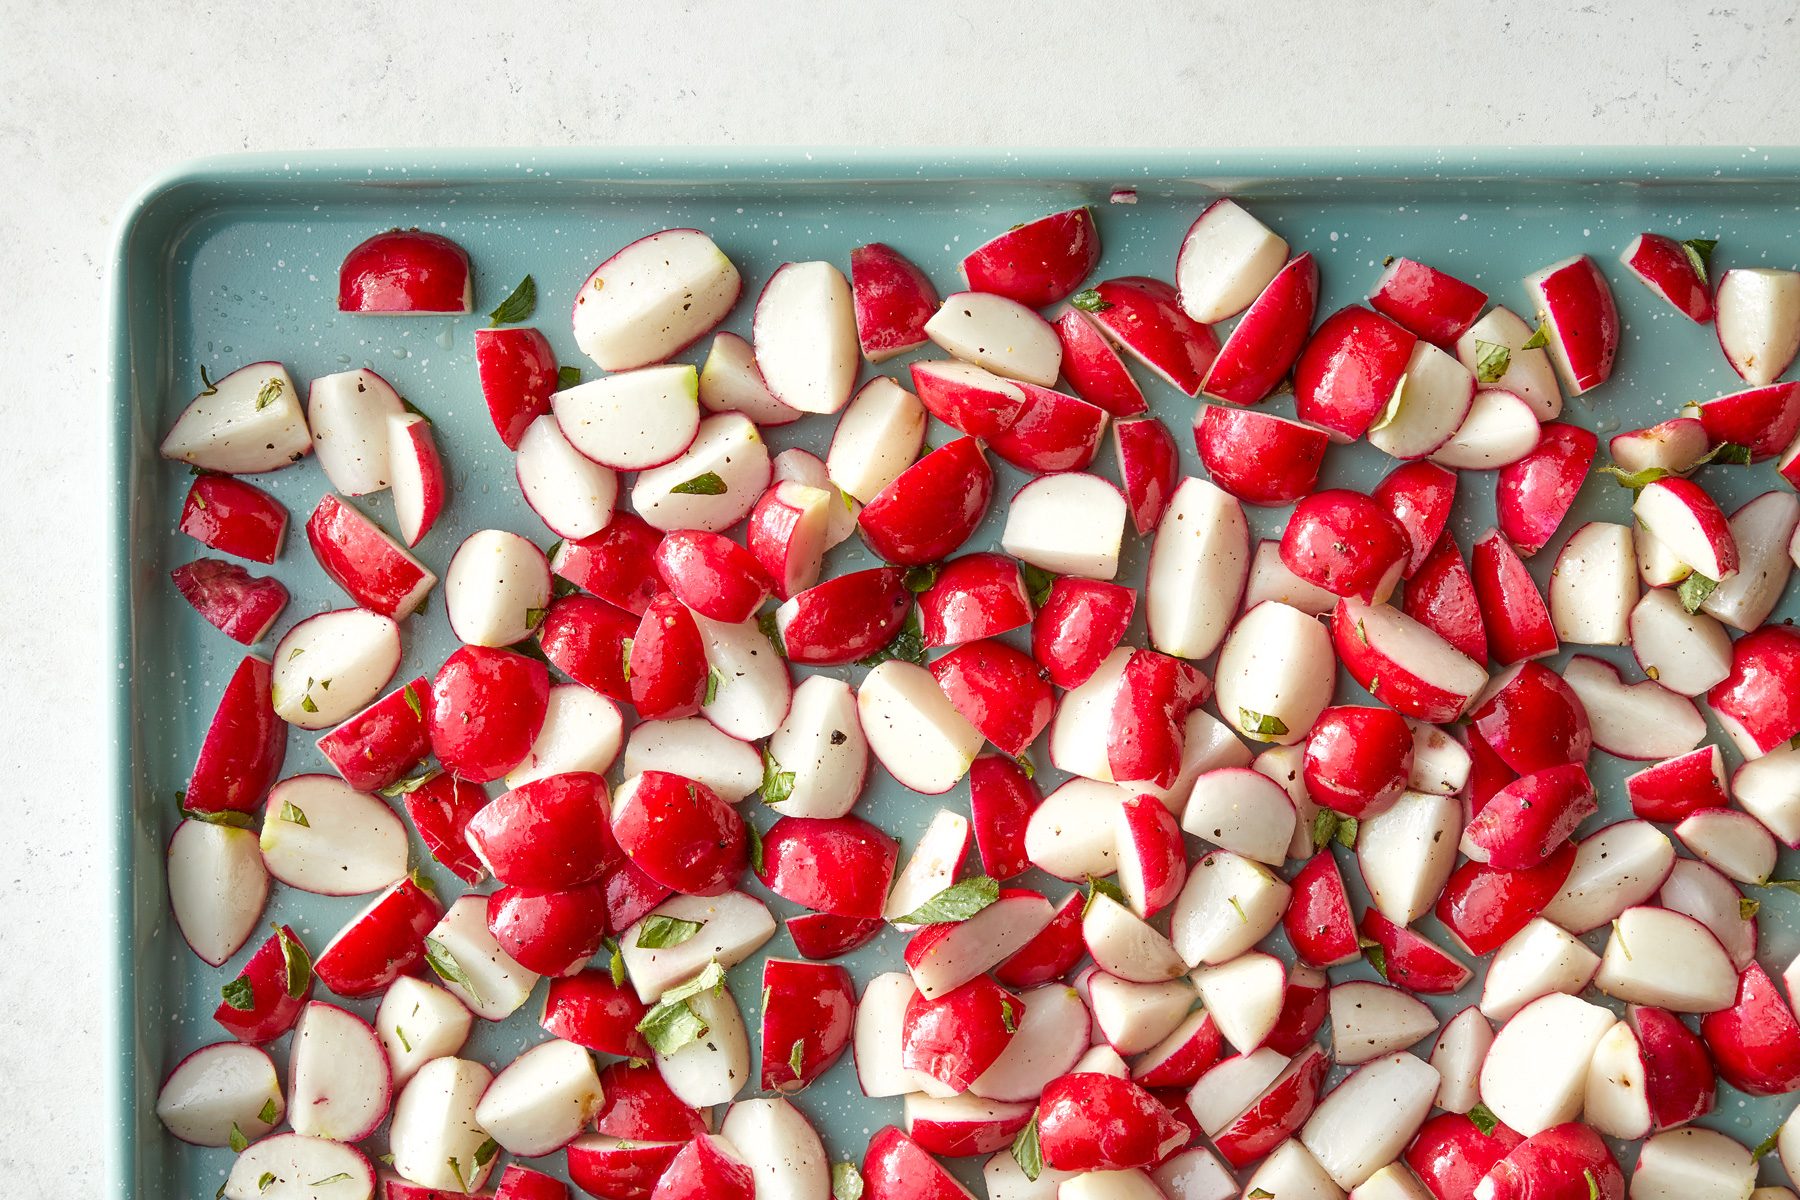 A tray of radishes on a white surface